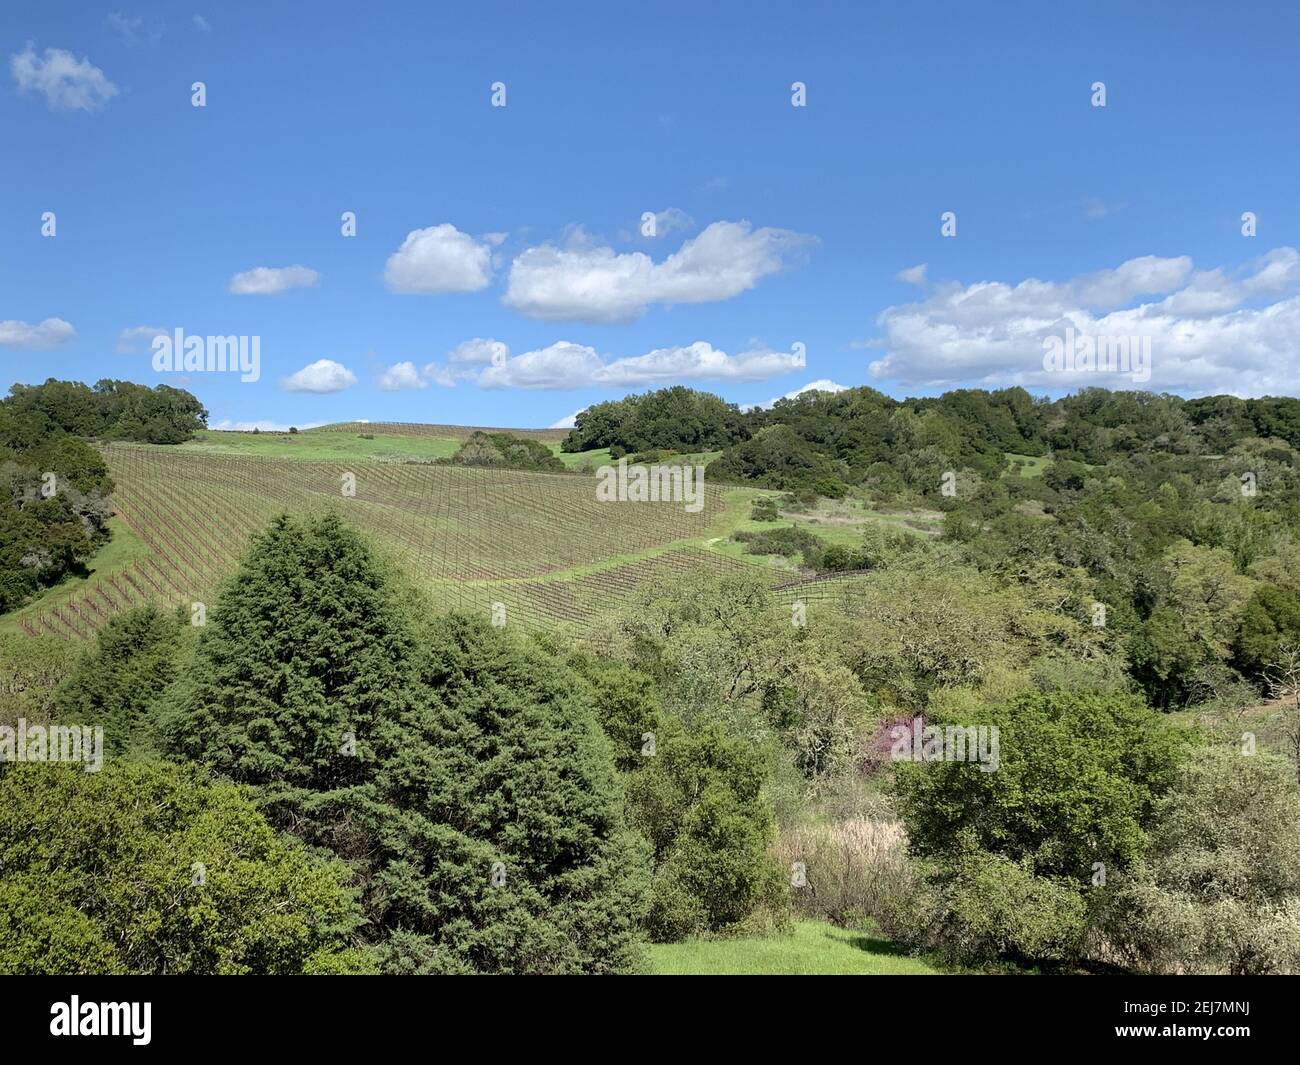 Scenic view of rolling hill vineyards among lush green trees in Windsor, California, the USA Stock Photo